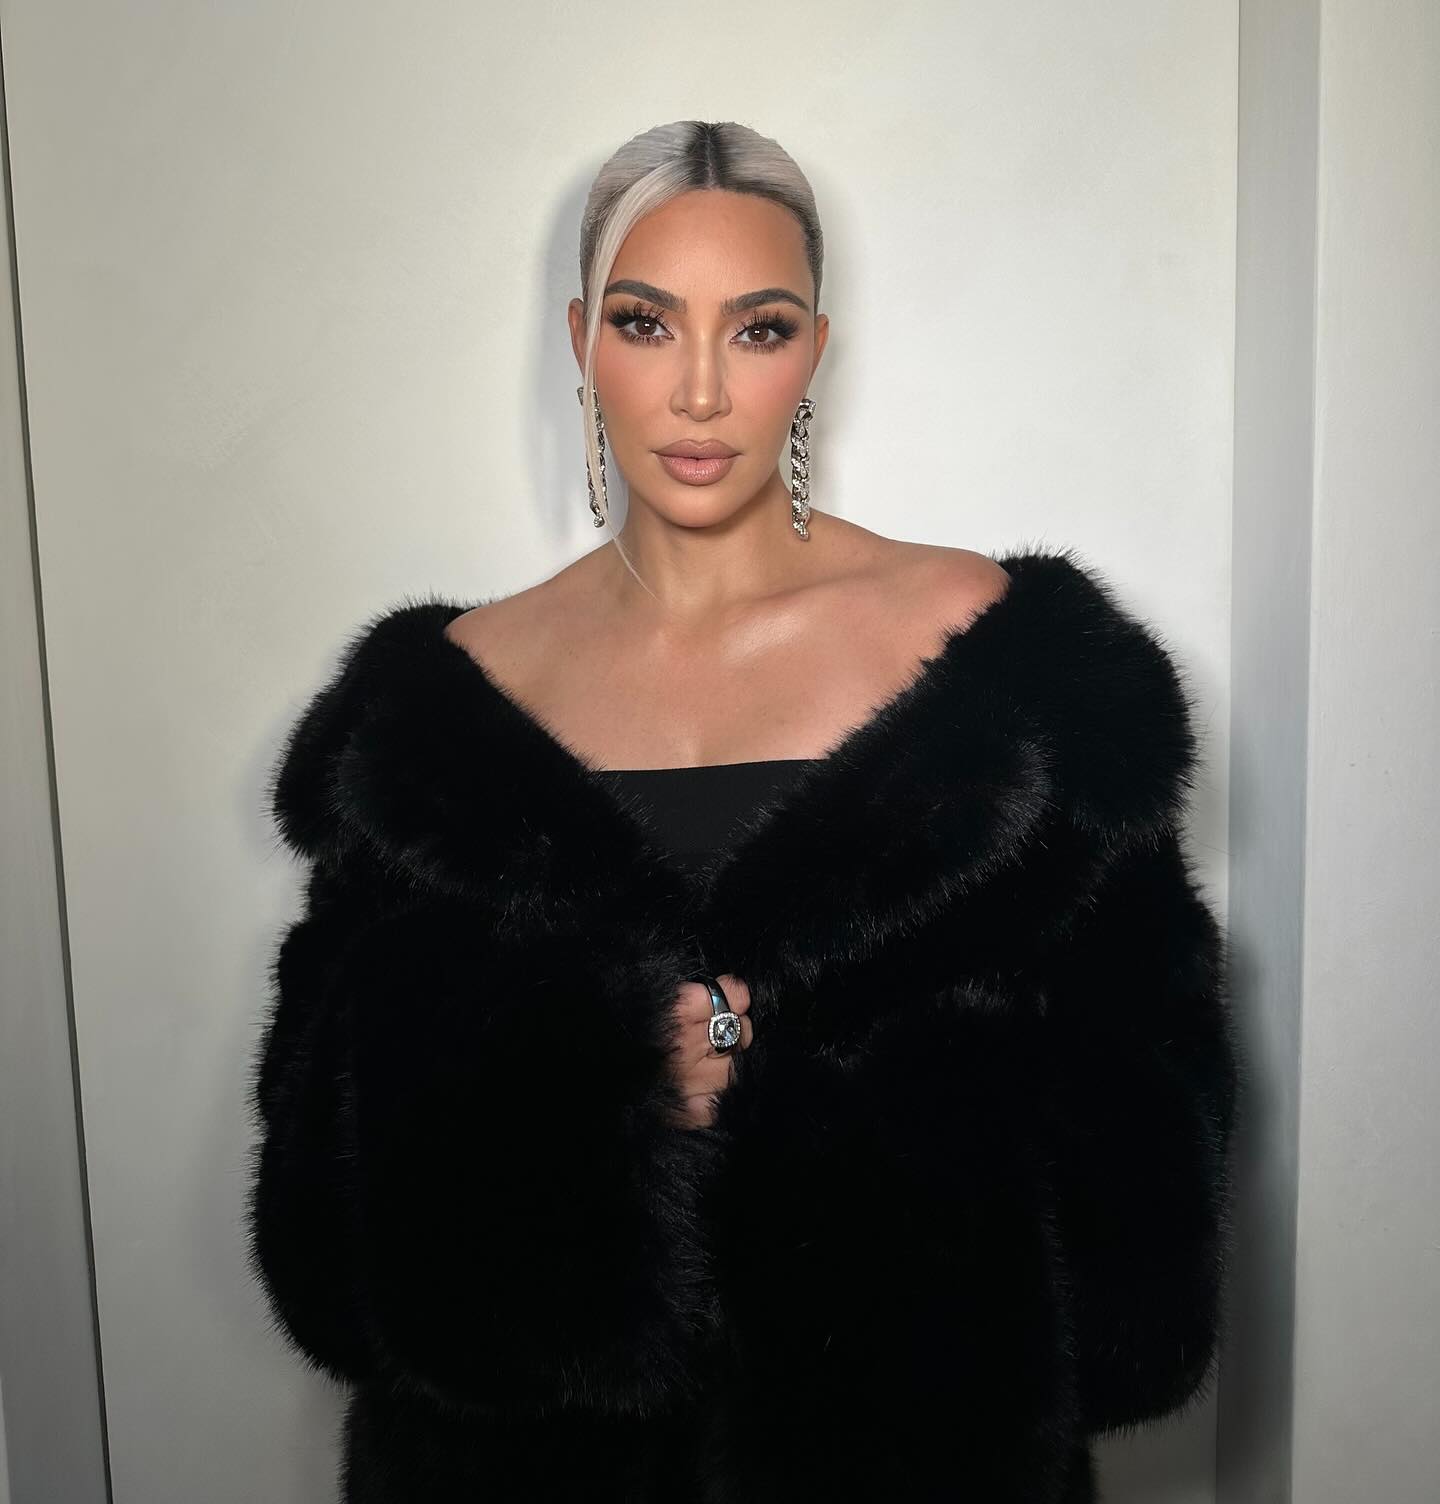 Kim first revealed her platinum look last month, and was instantly panned by fans